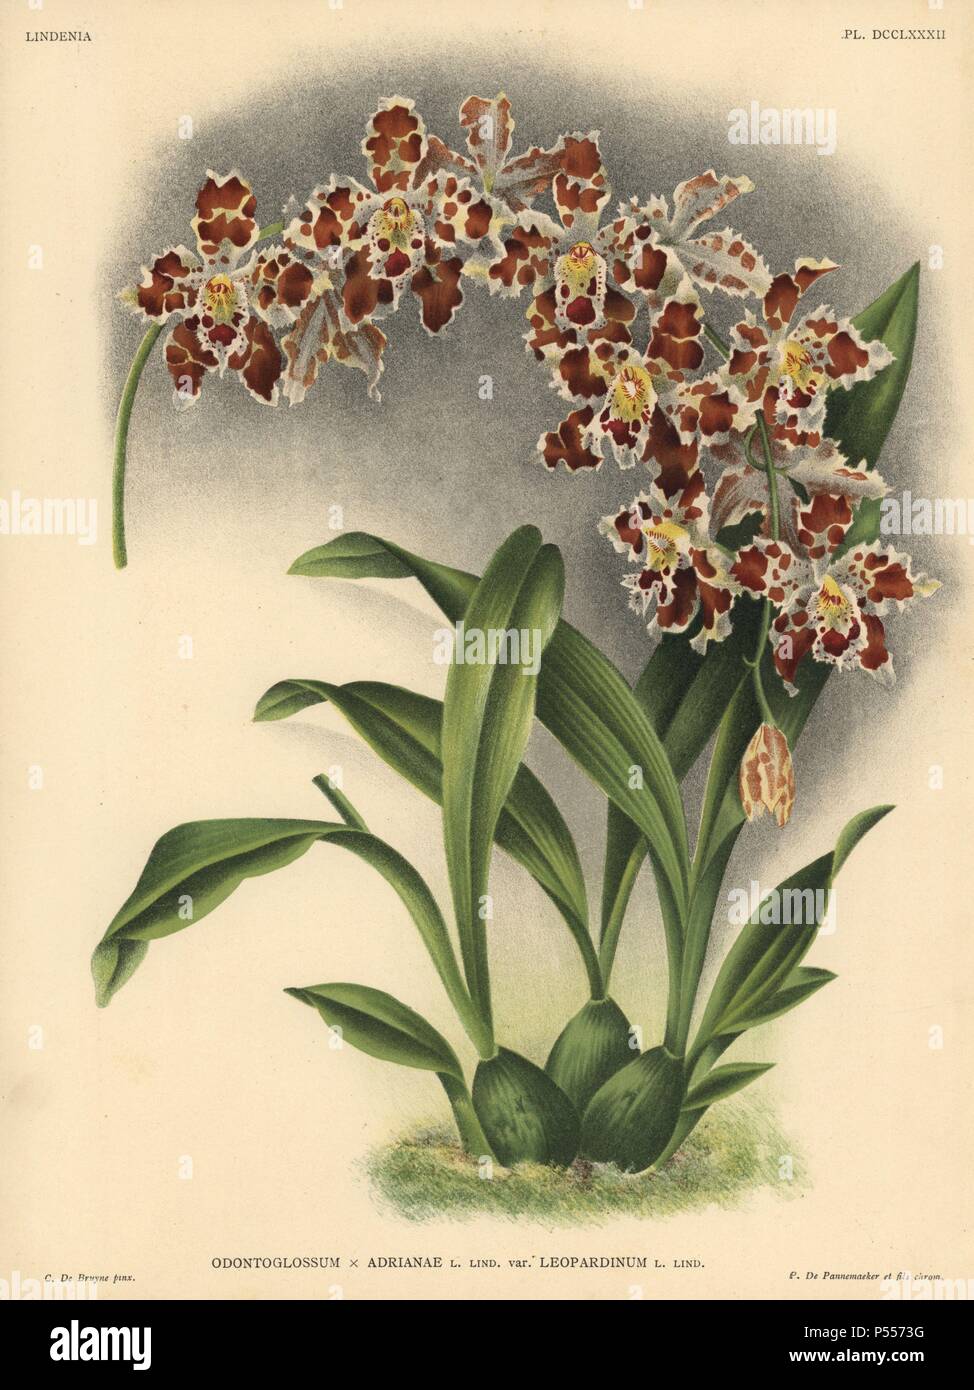 Leopardinum variety of Odontoglossum x Adrianae hybrid orchid. Illustration drawn by C. de Bruyne and chromolithographed by P. de Pannemaeker et fils from Lucien Linden's 'Lindenia, Iconographie des Orchidees,' Brussels, 1902. Stock Photo